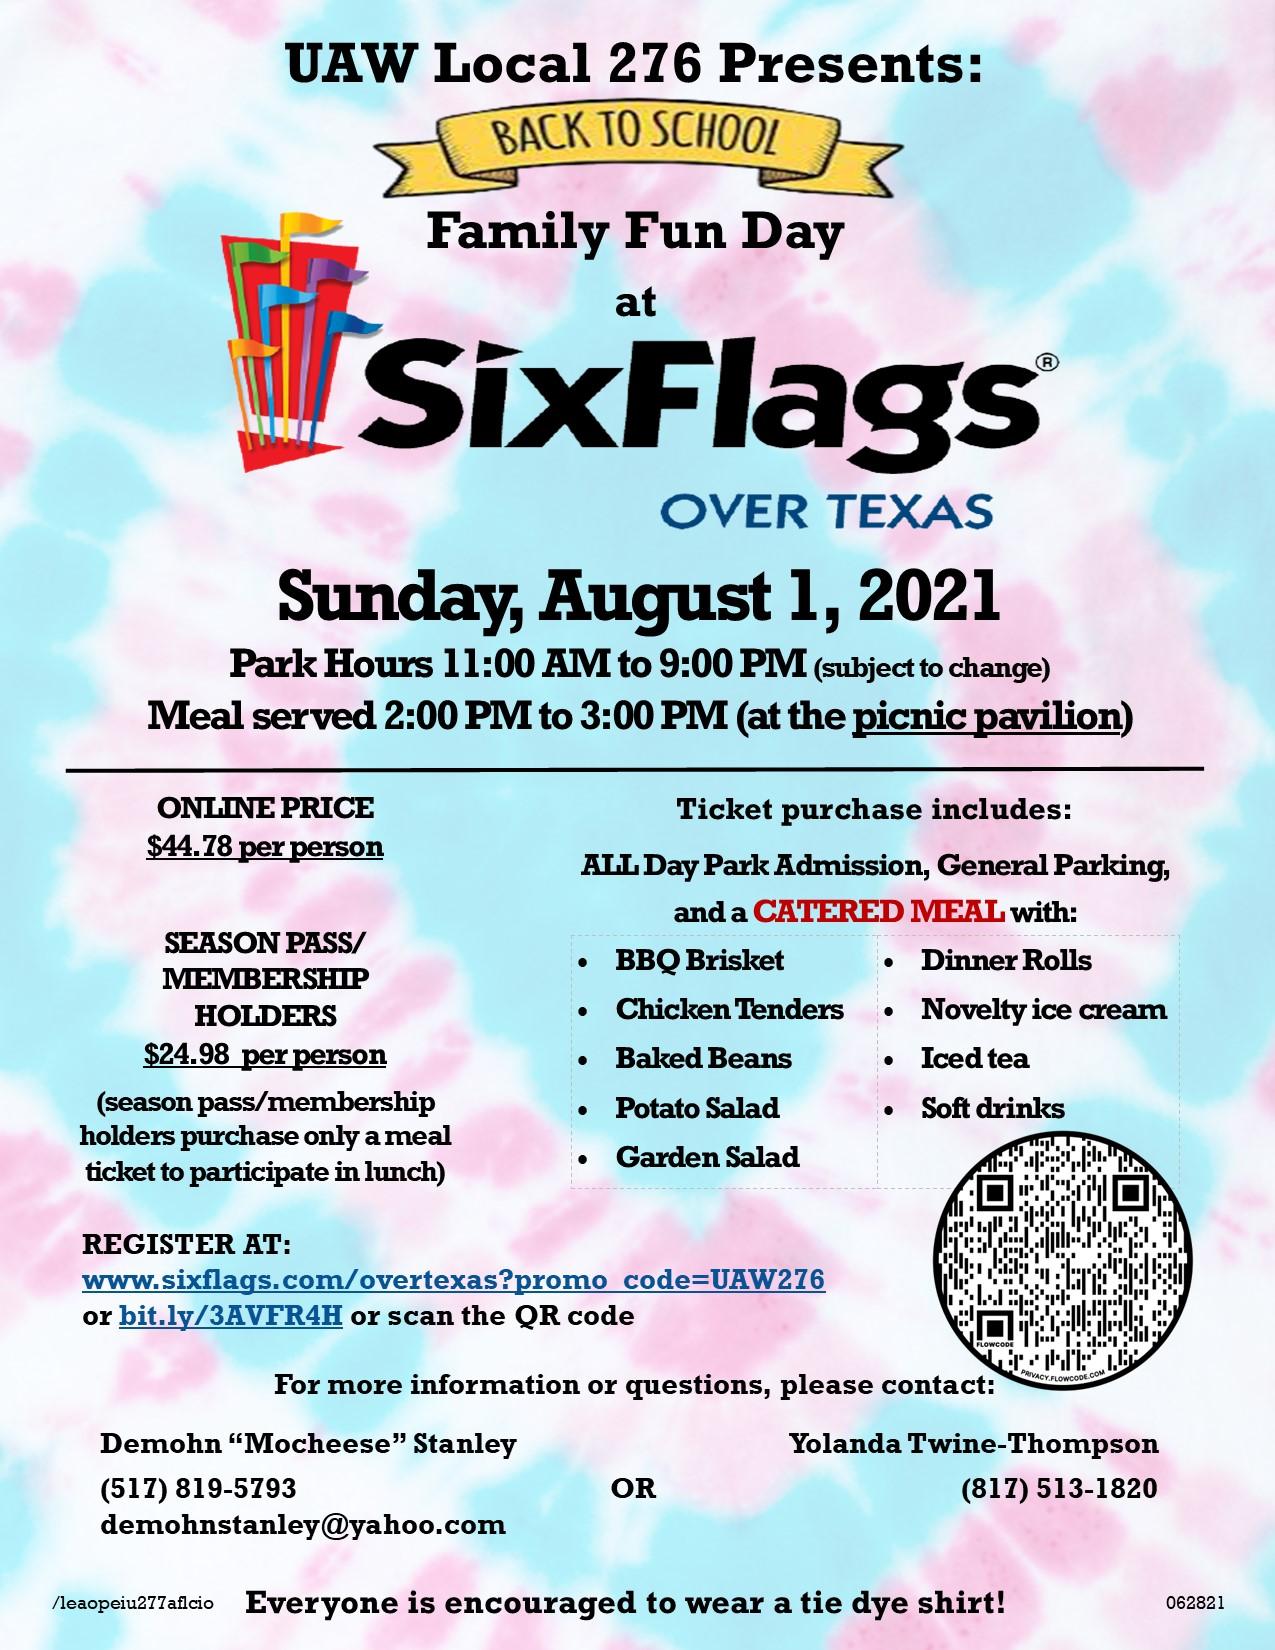 Family Fun Day at Six Flags | UAW Local 276